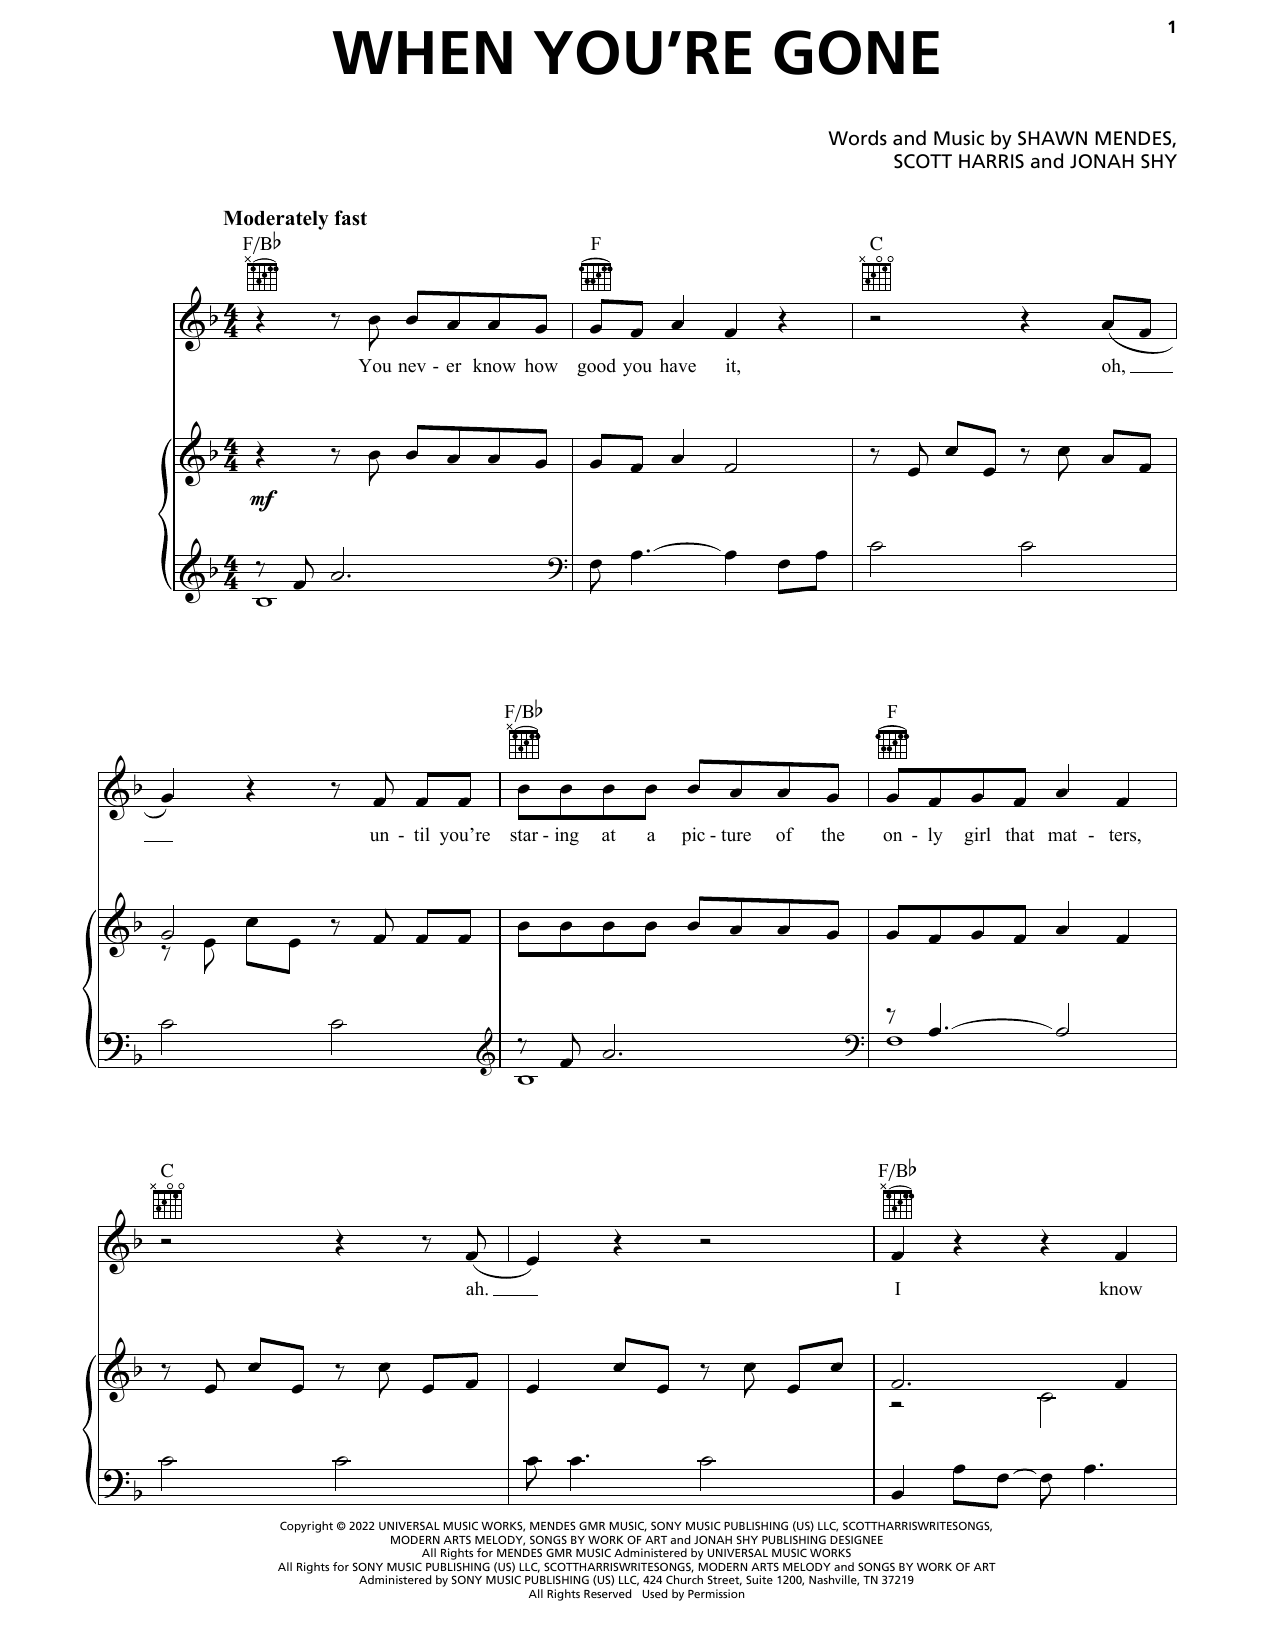 Shawn Mendes When You're Gone sheet music notes printable PDF score